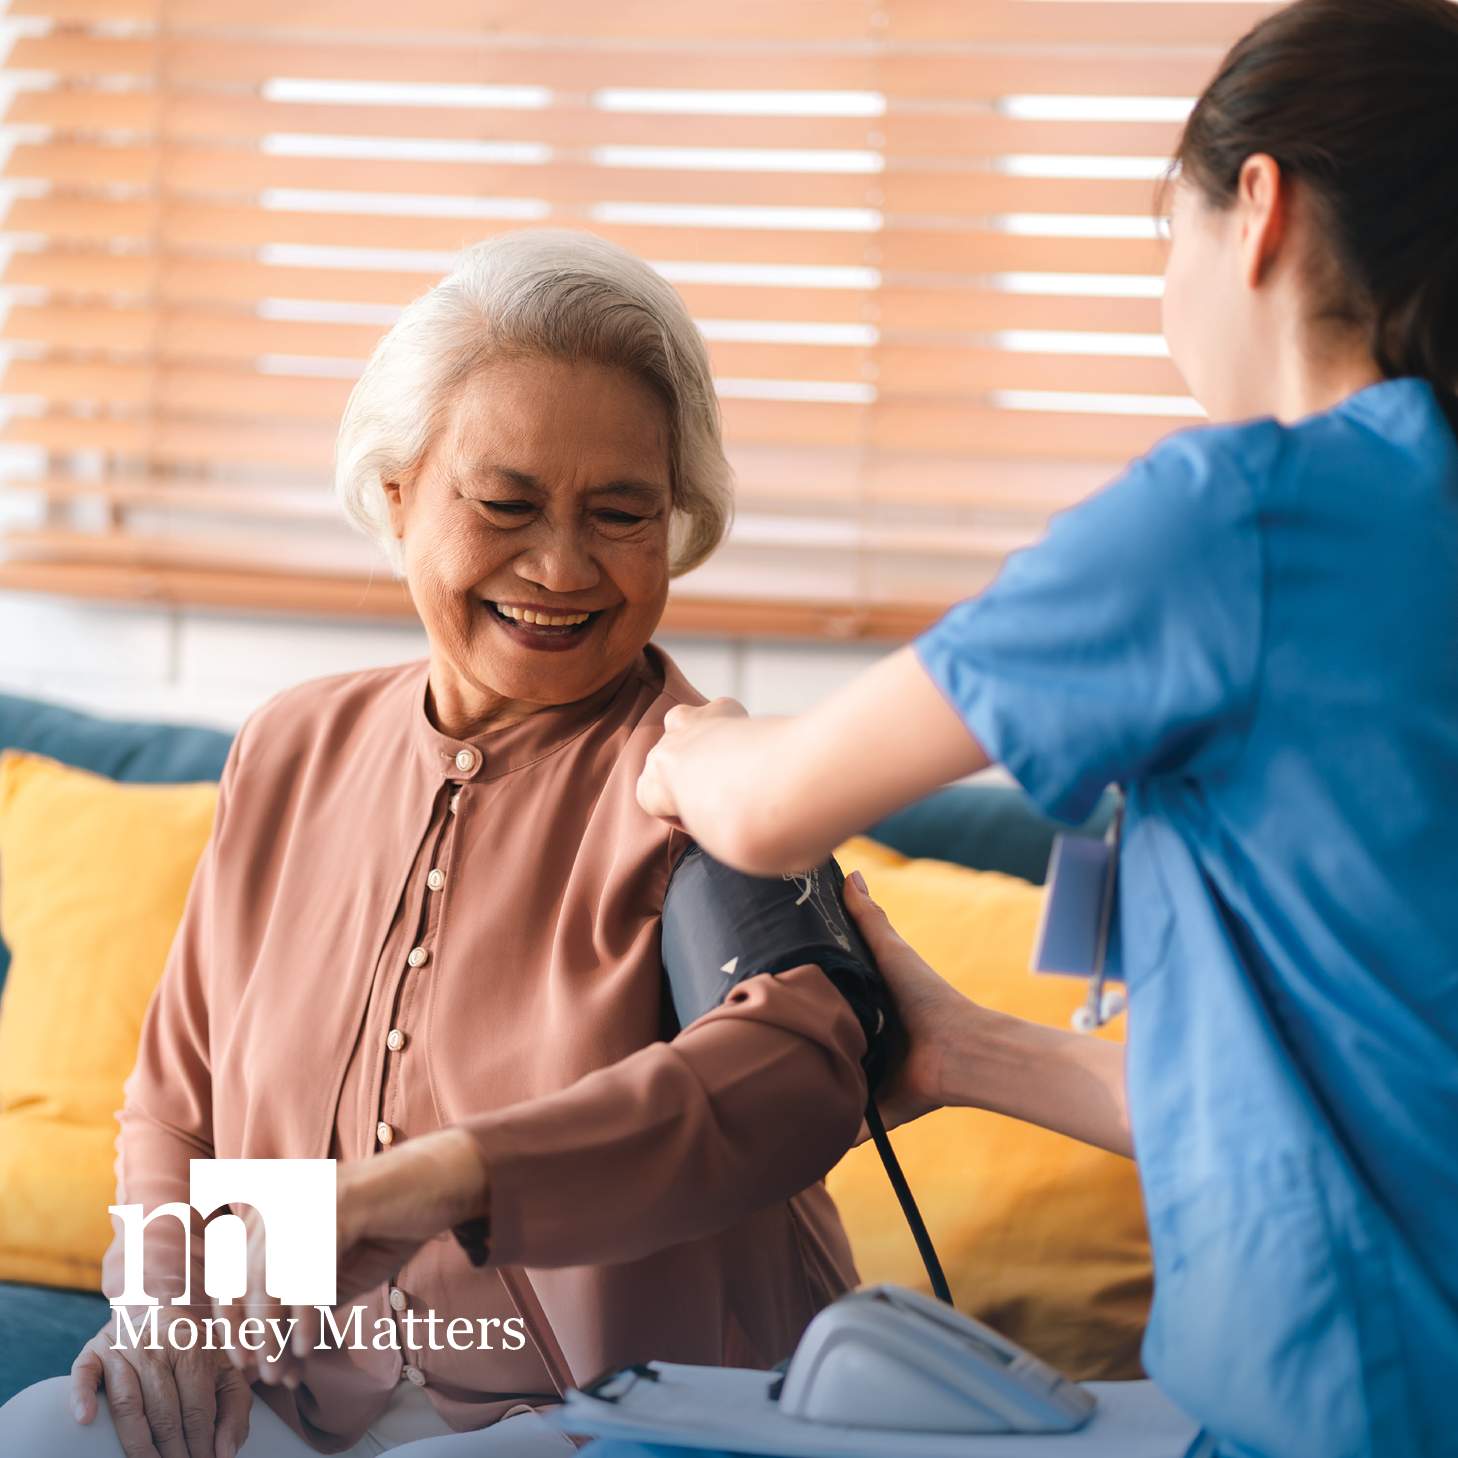 An older woman smiles as a nurse takes her blood pressure.